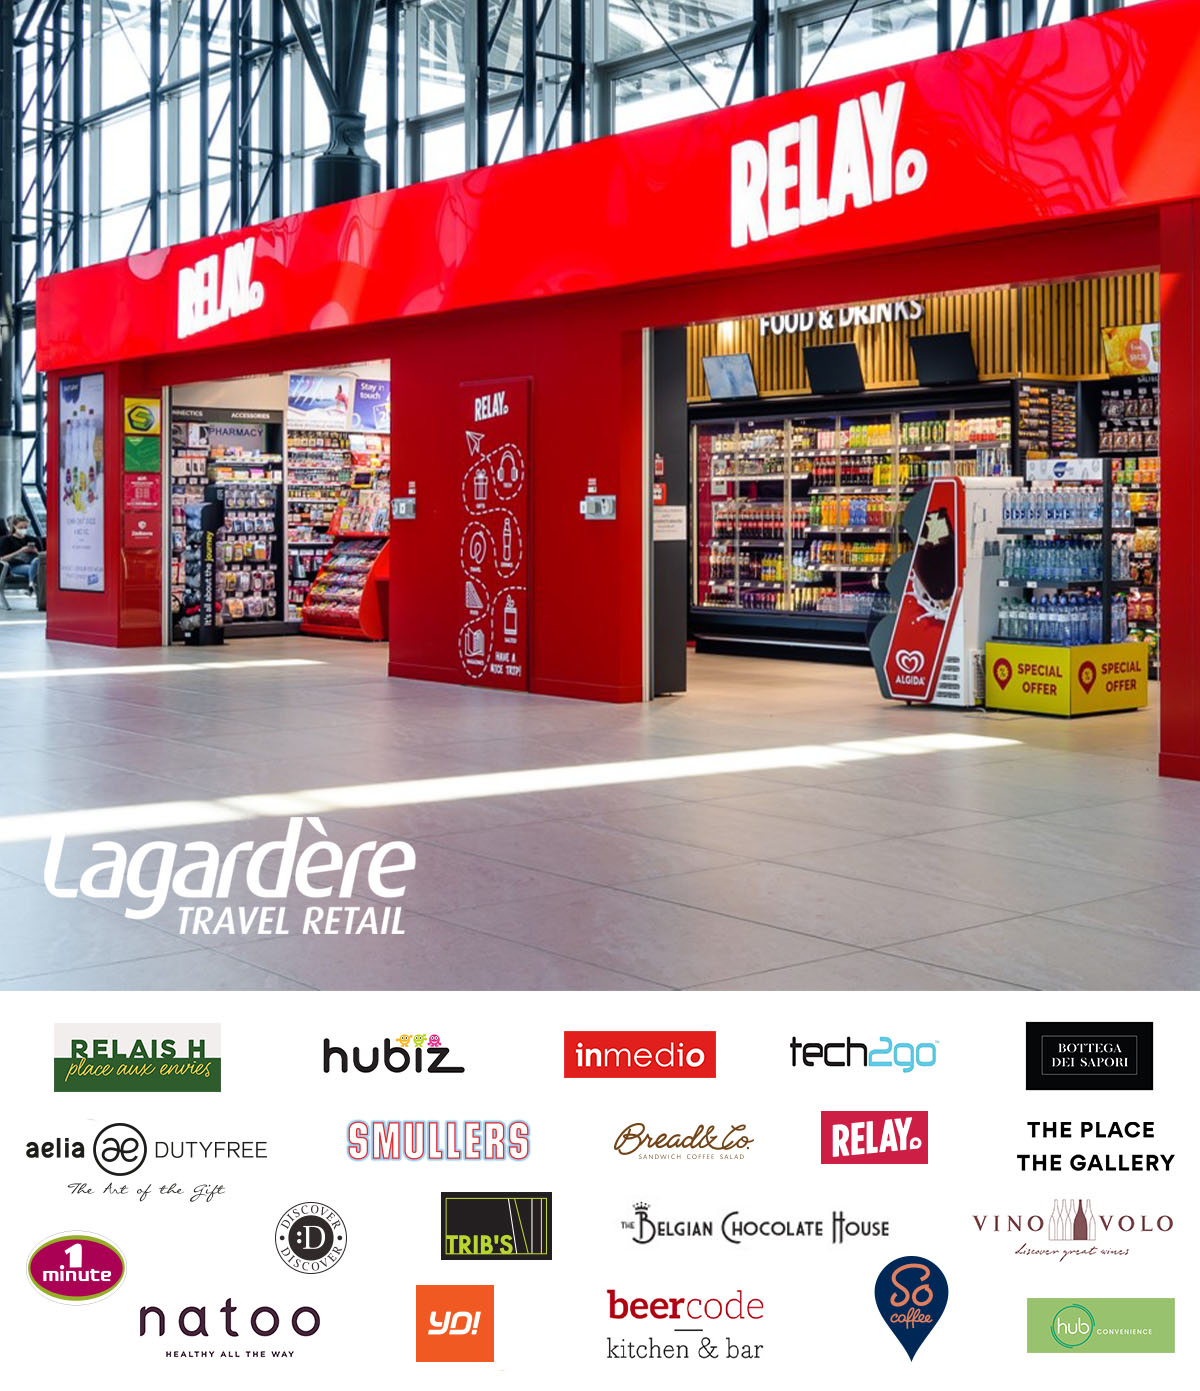 lagardere travel retail luxembourg group